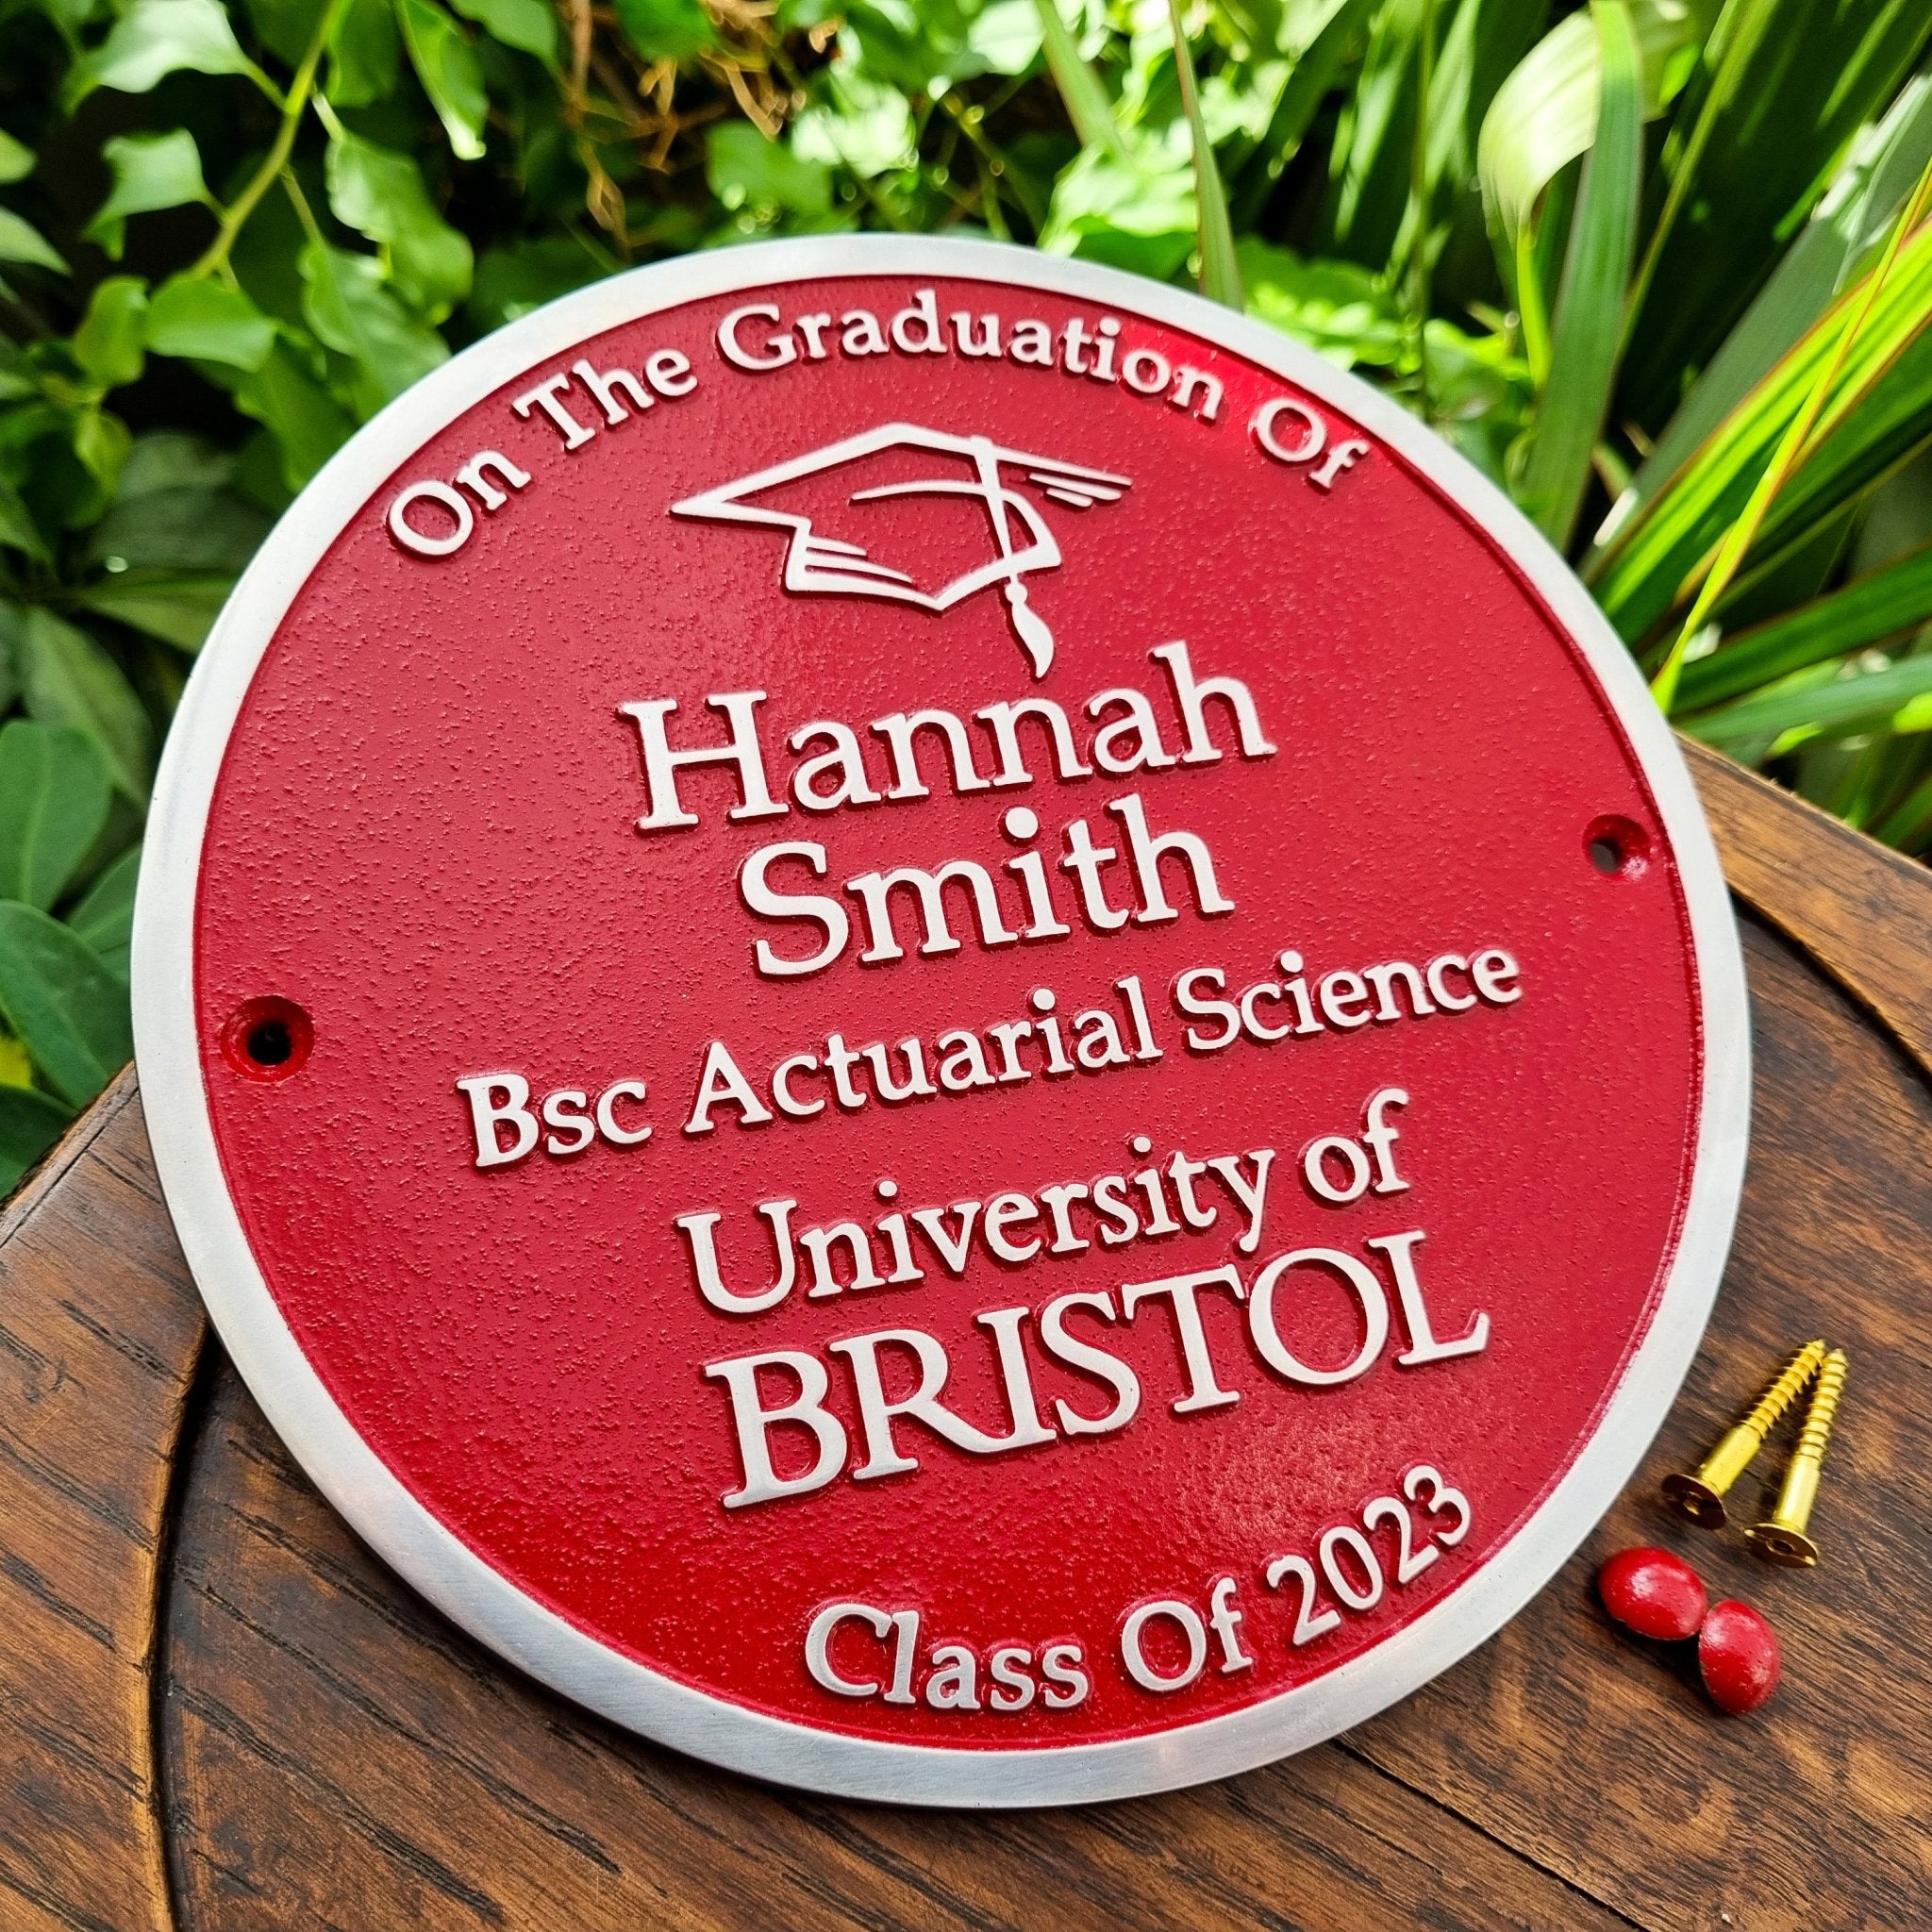 Personalised Blue Plaque 300mm (12